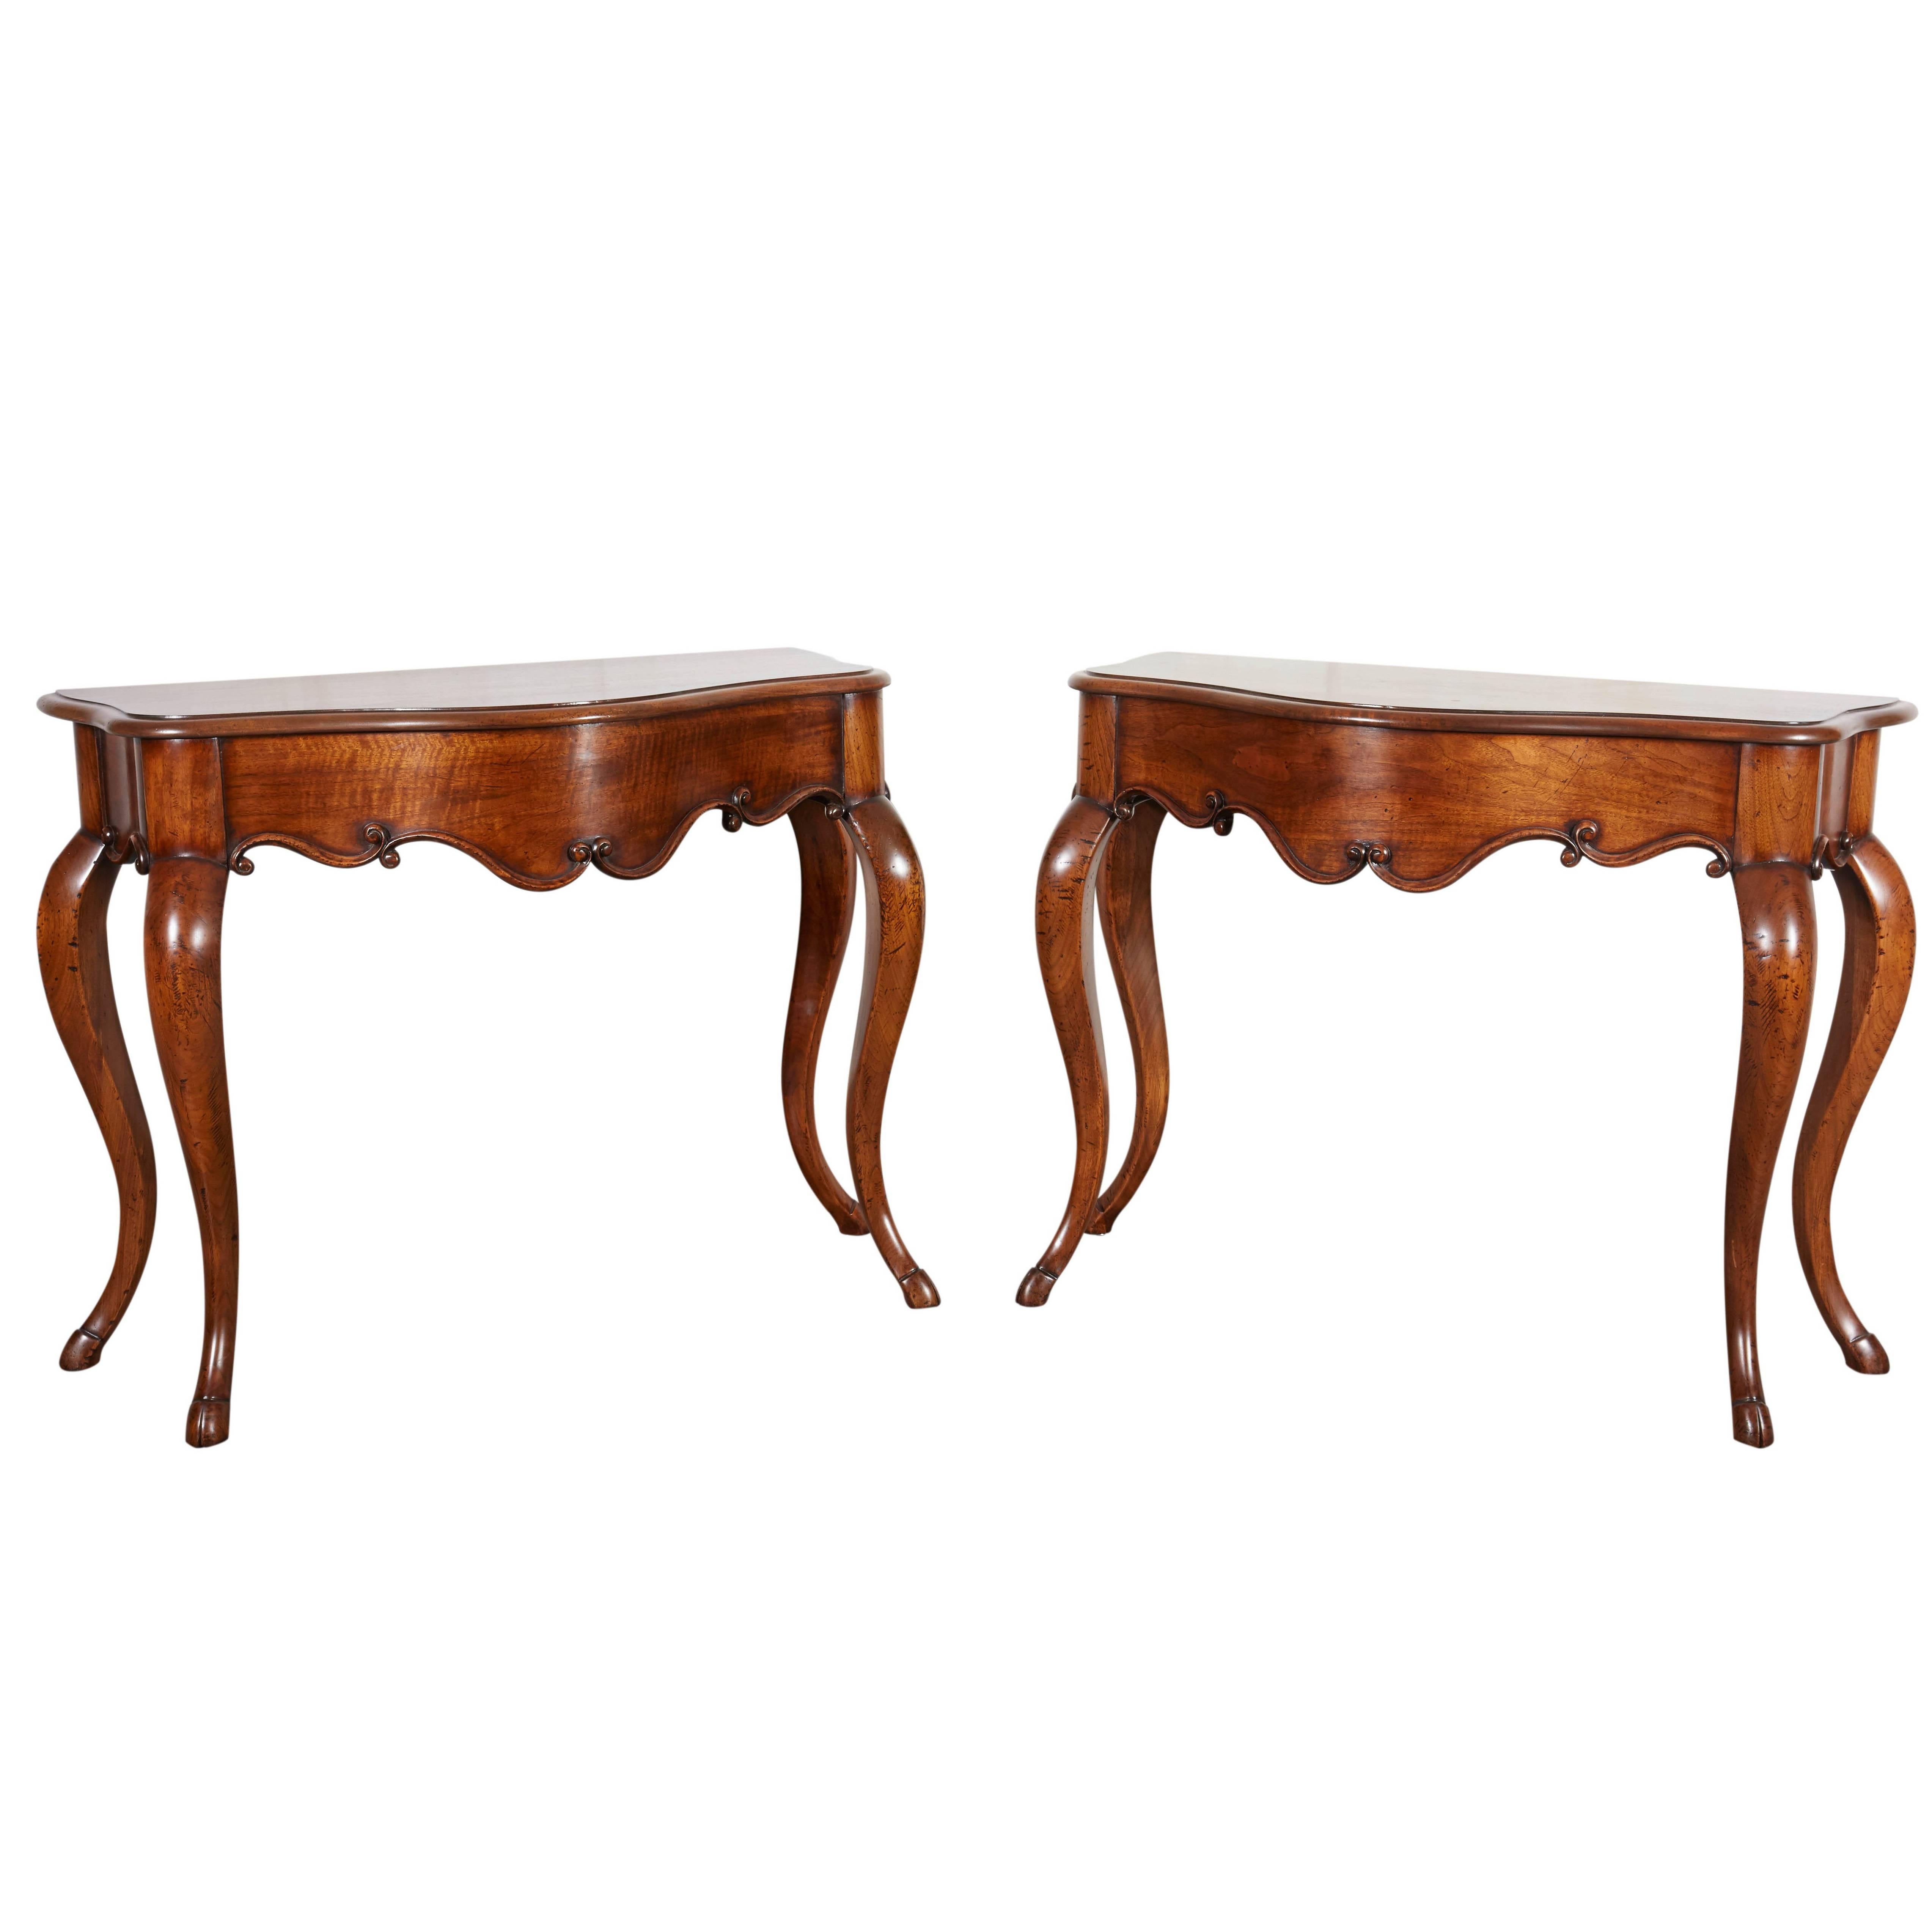 Fine Pair of Mid-19th Century Walnut Console Tables